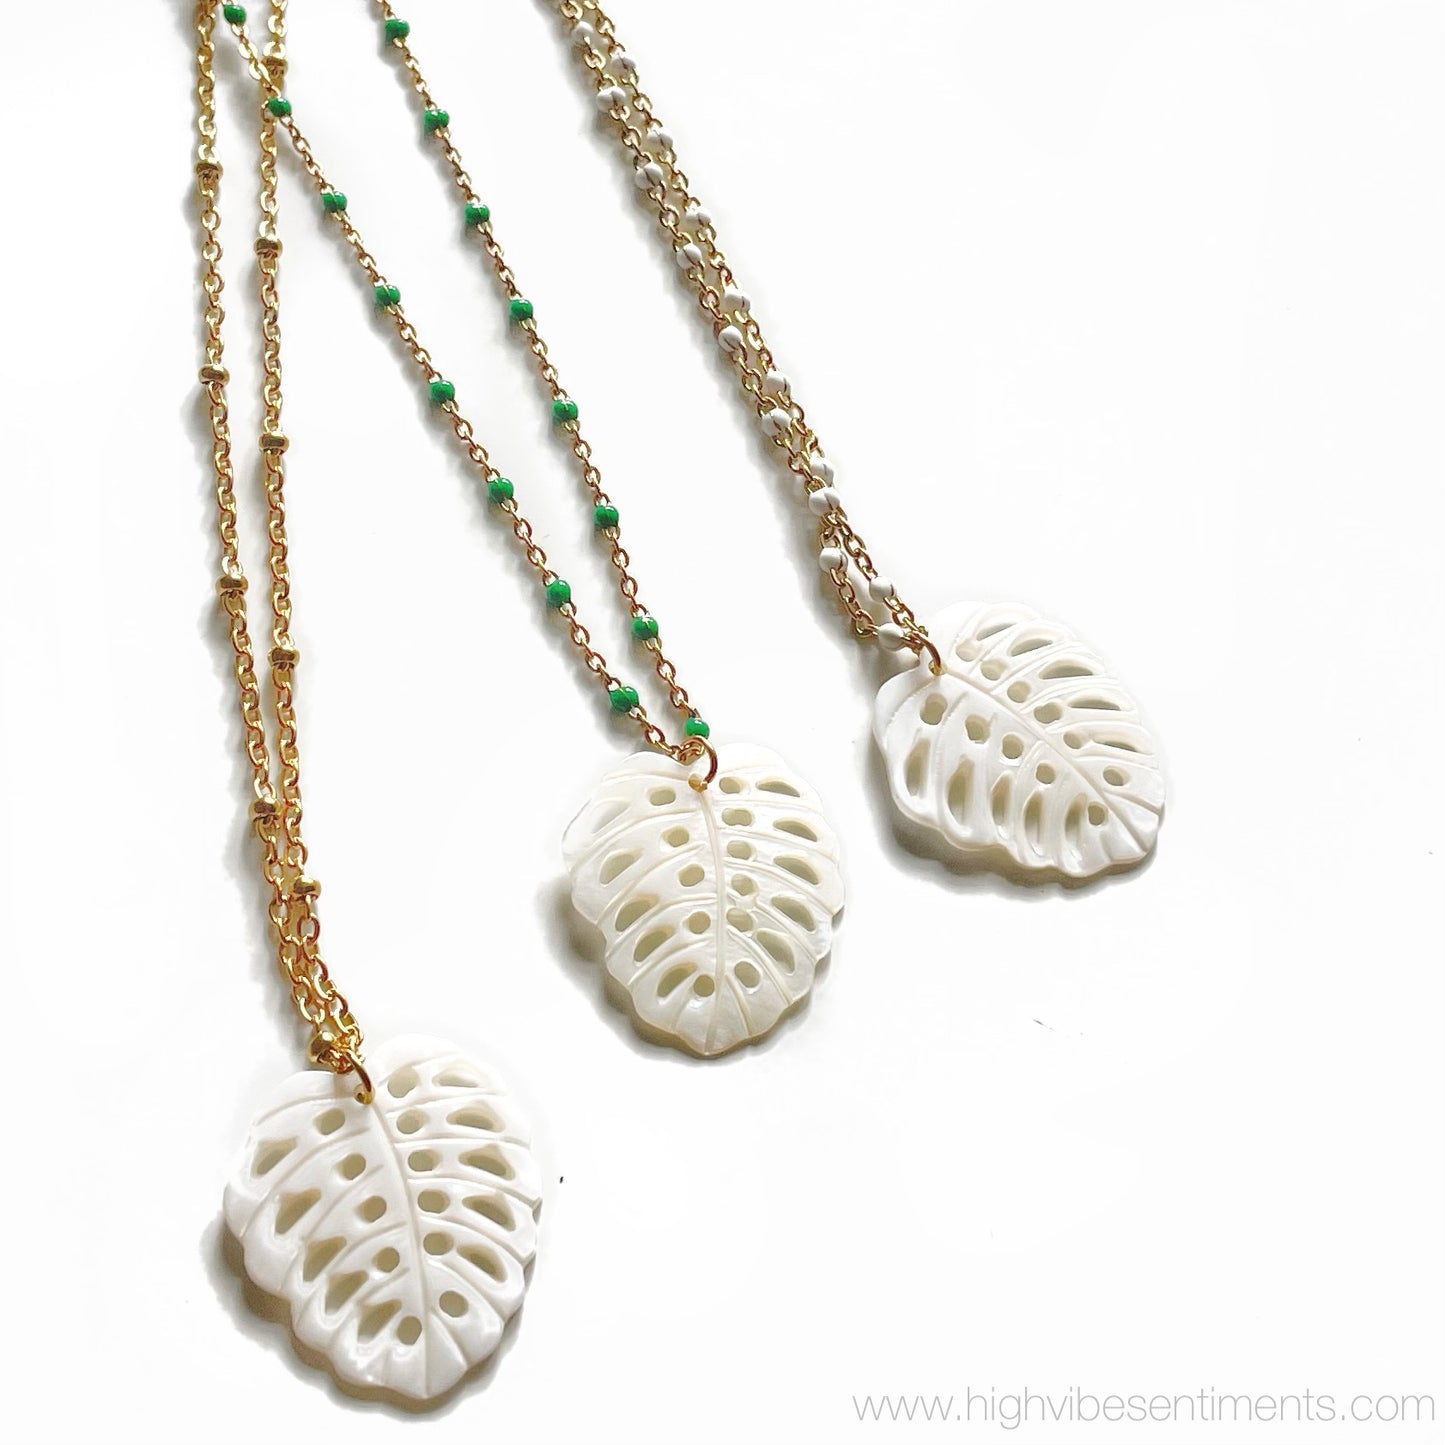 High Vibe Sentiments, Shell Monstera Necklaces 